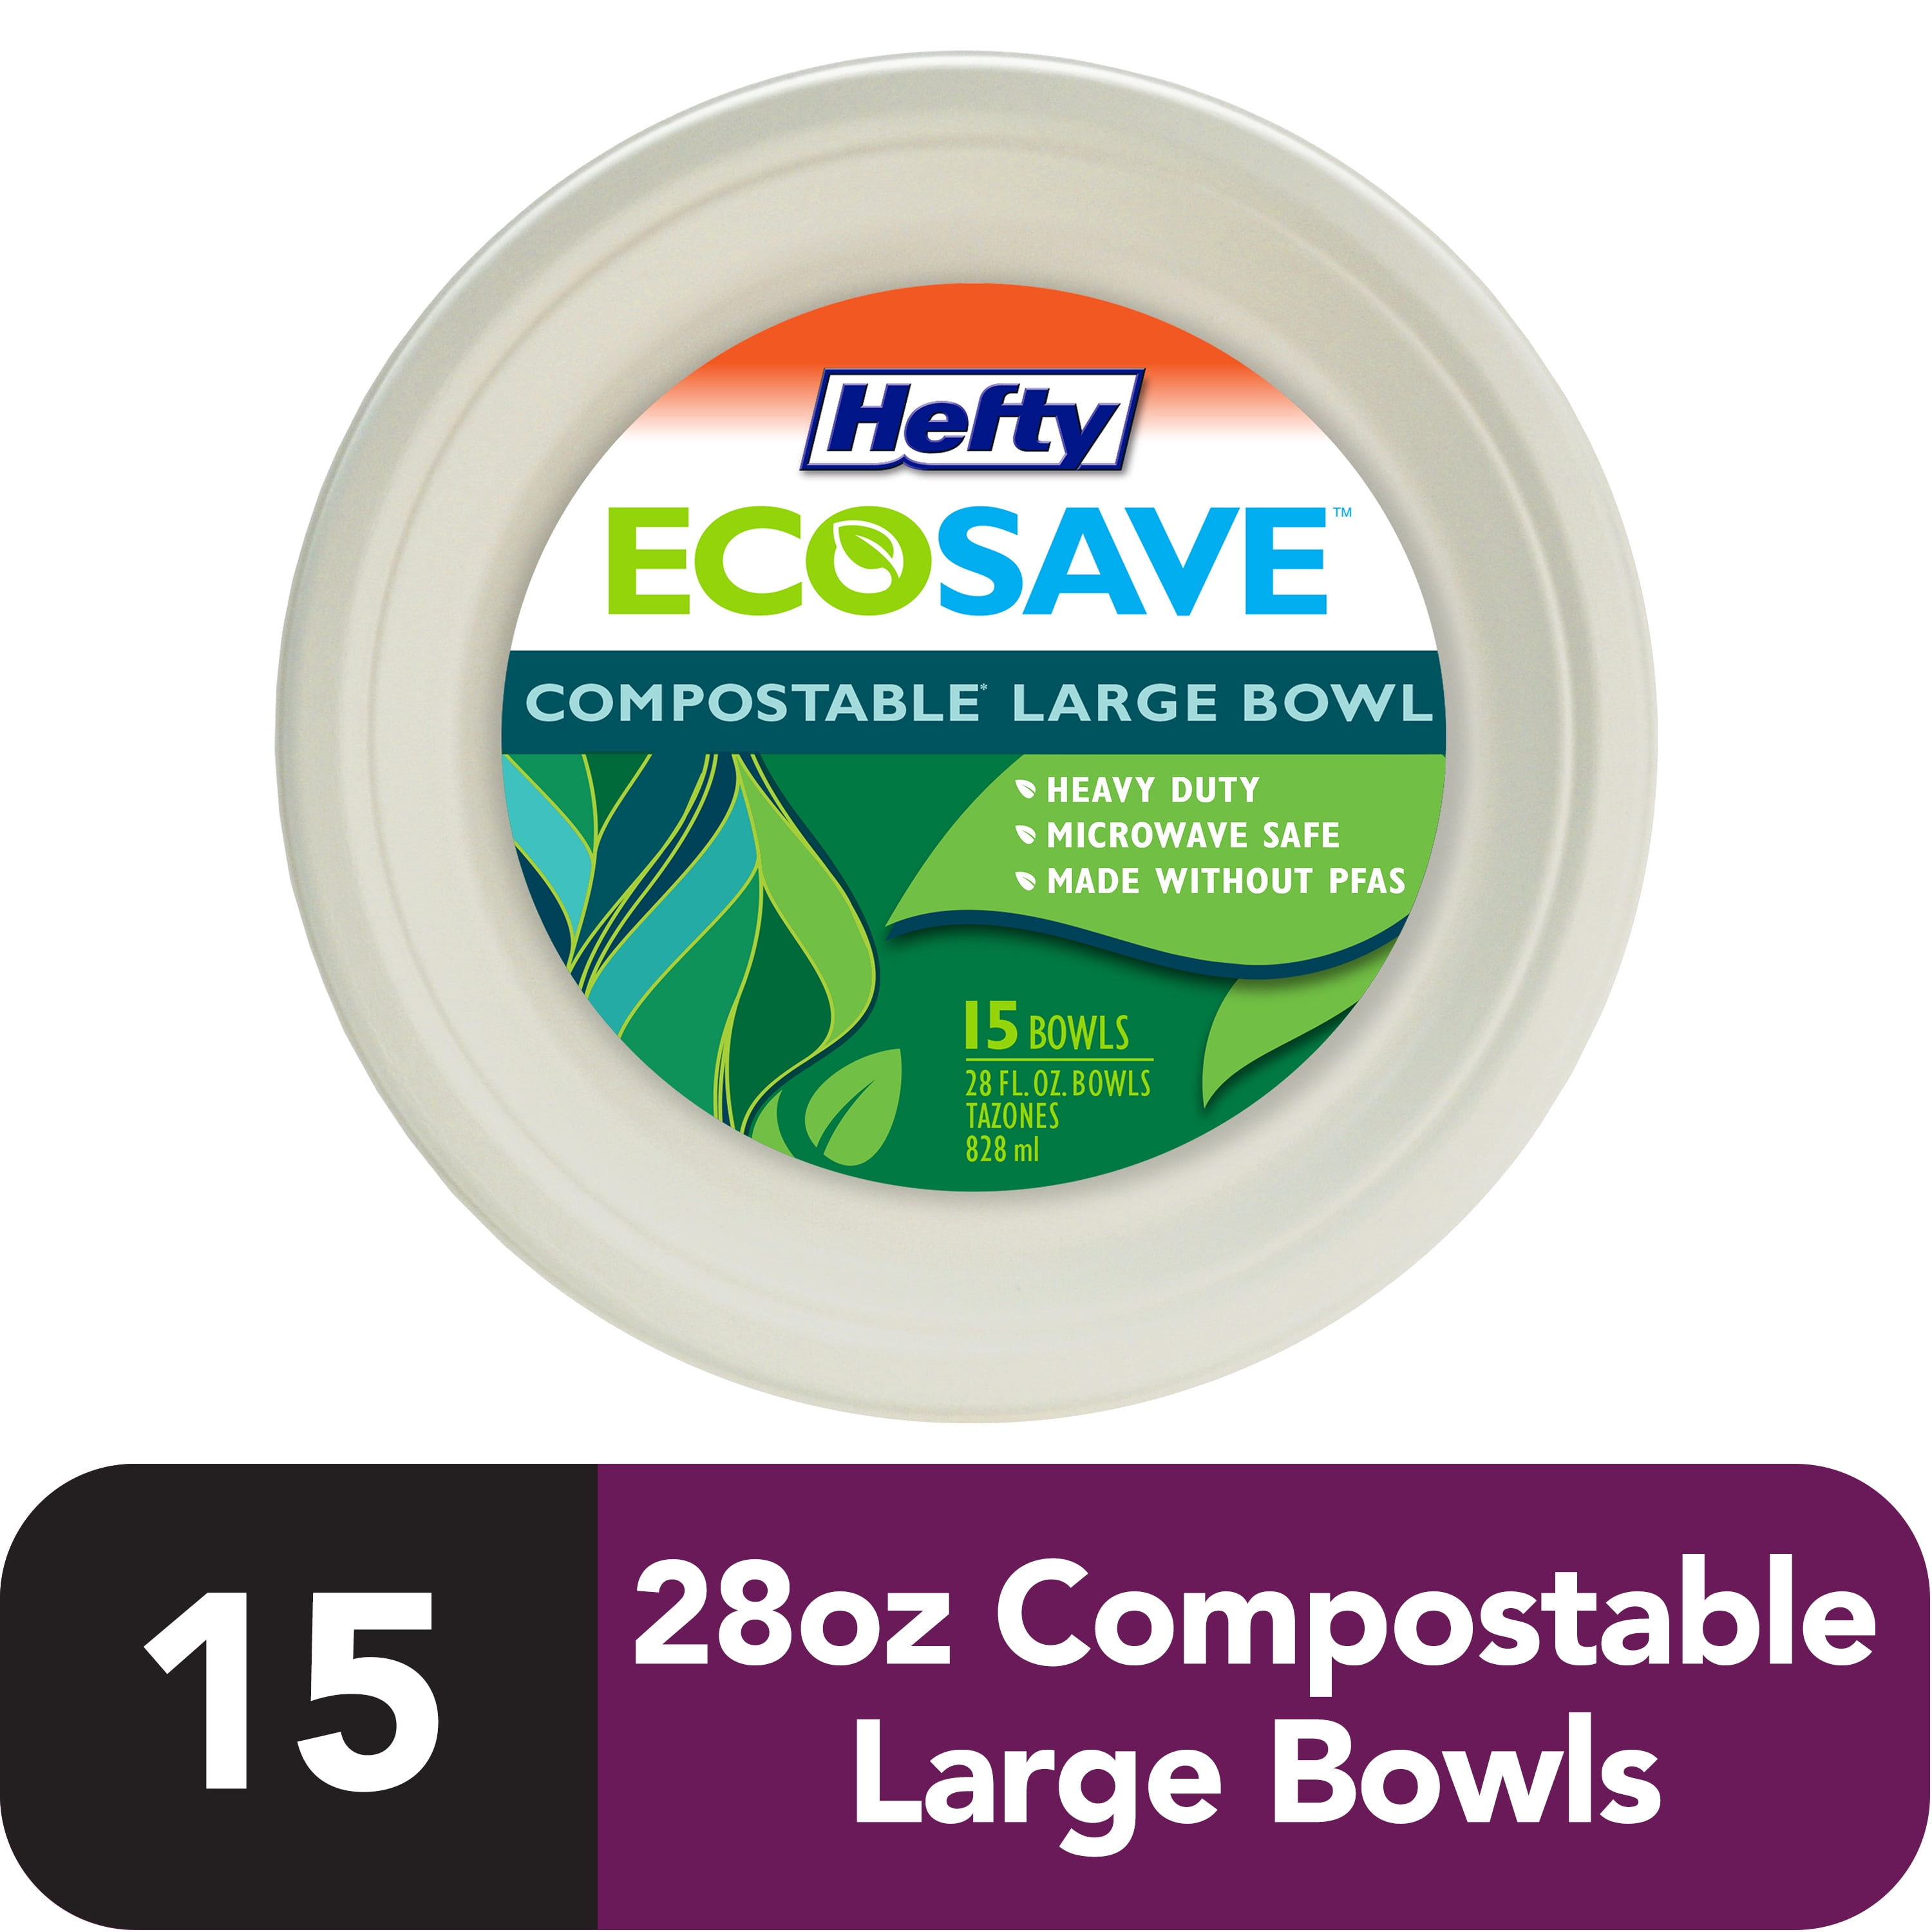 Hefty ECOSAVE Compostable Paper Bowls, 28 Ounce, 15 Count 